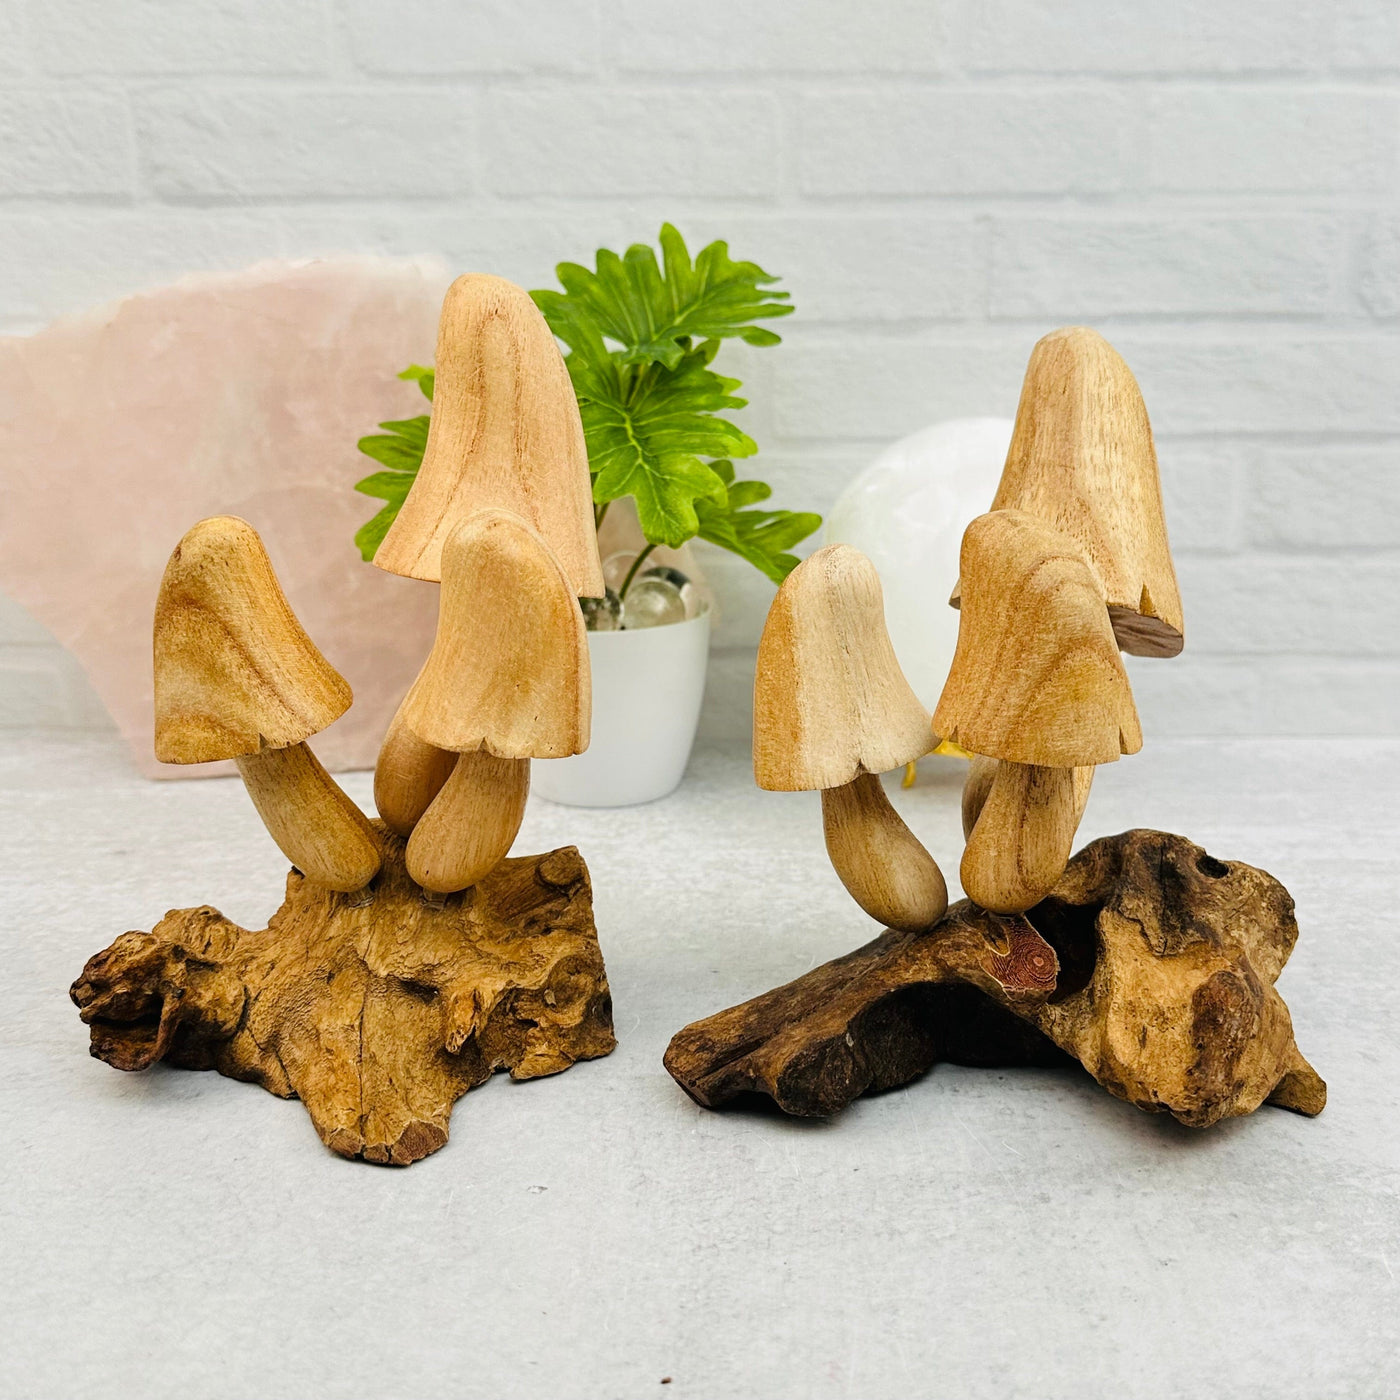 large mushrooms displayed to show the differences in the color shades and sizes 